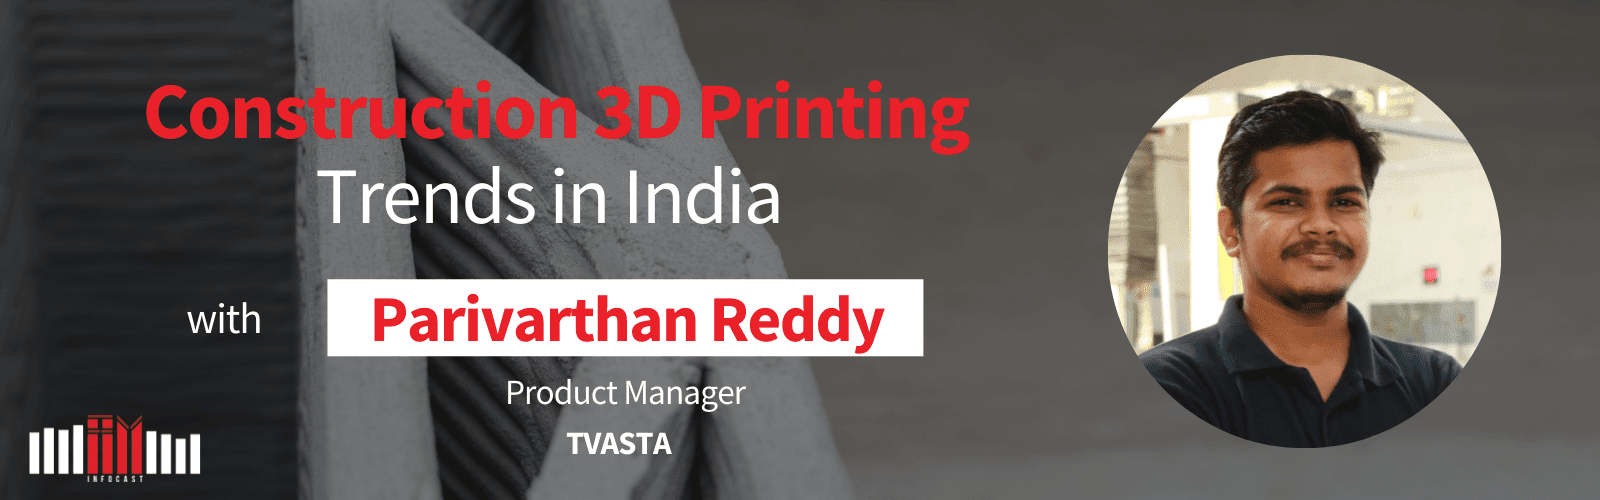 Construction 3D Printing Trends in India